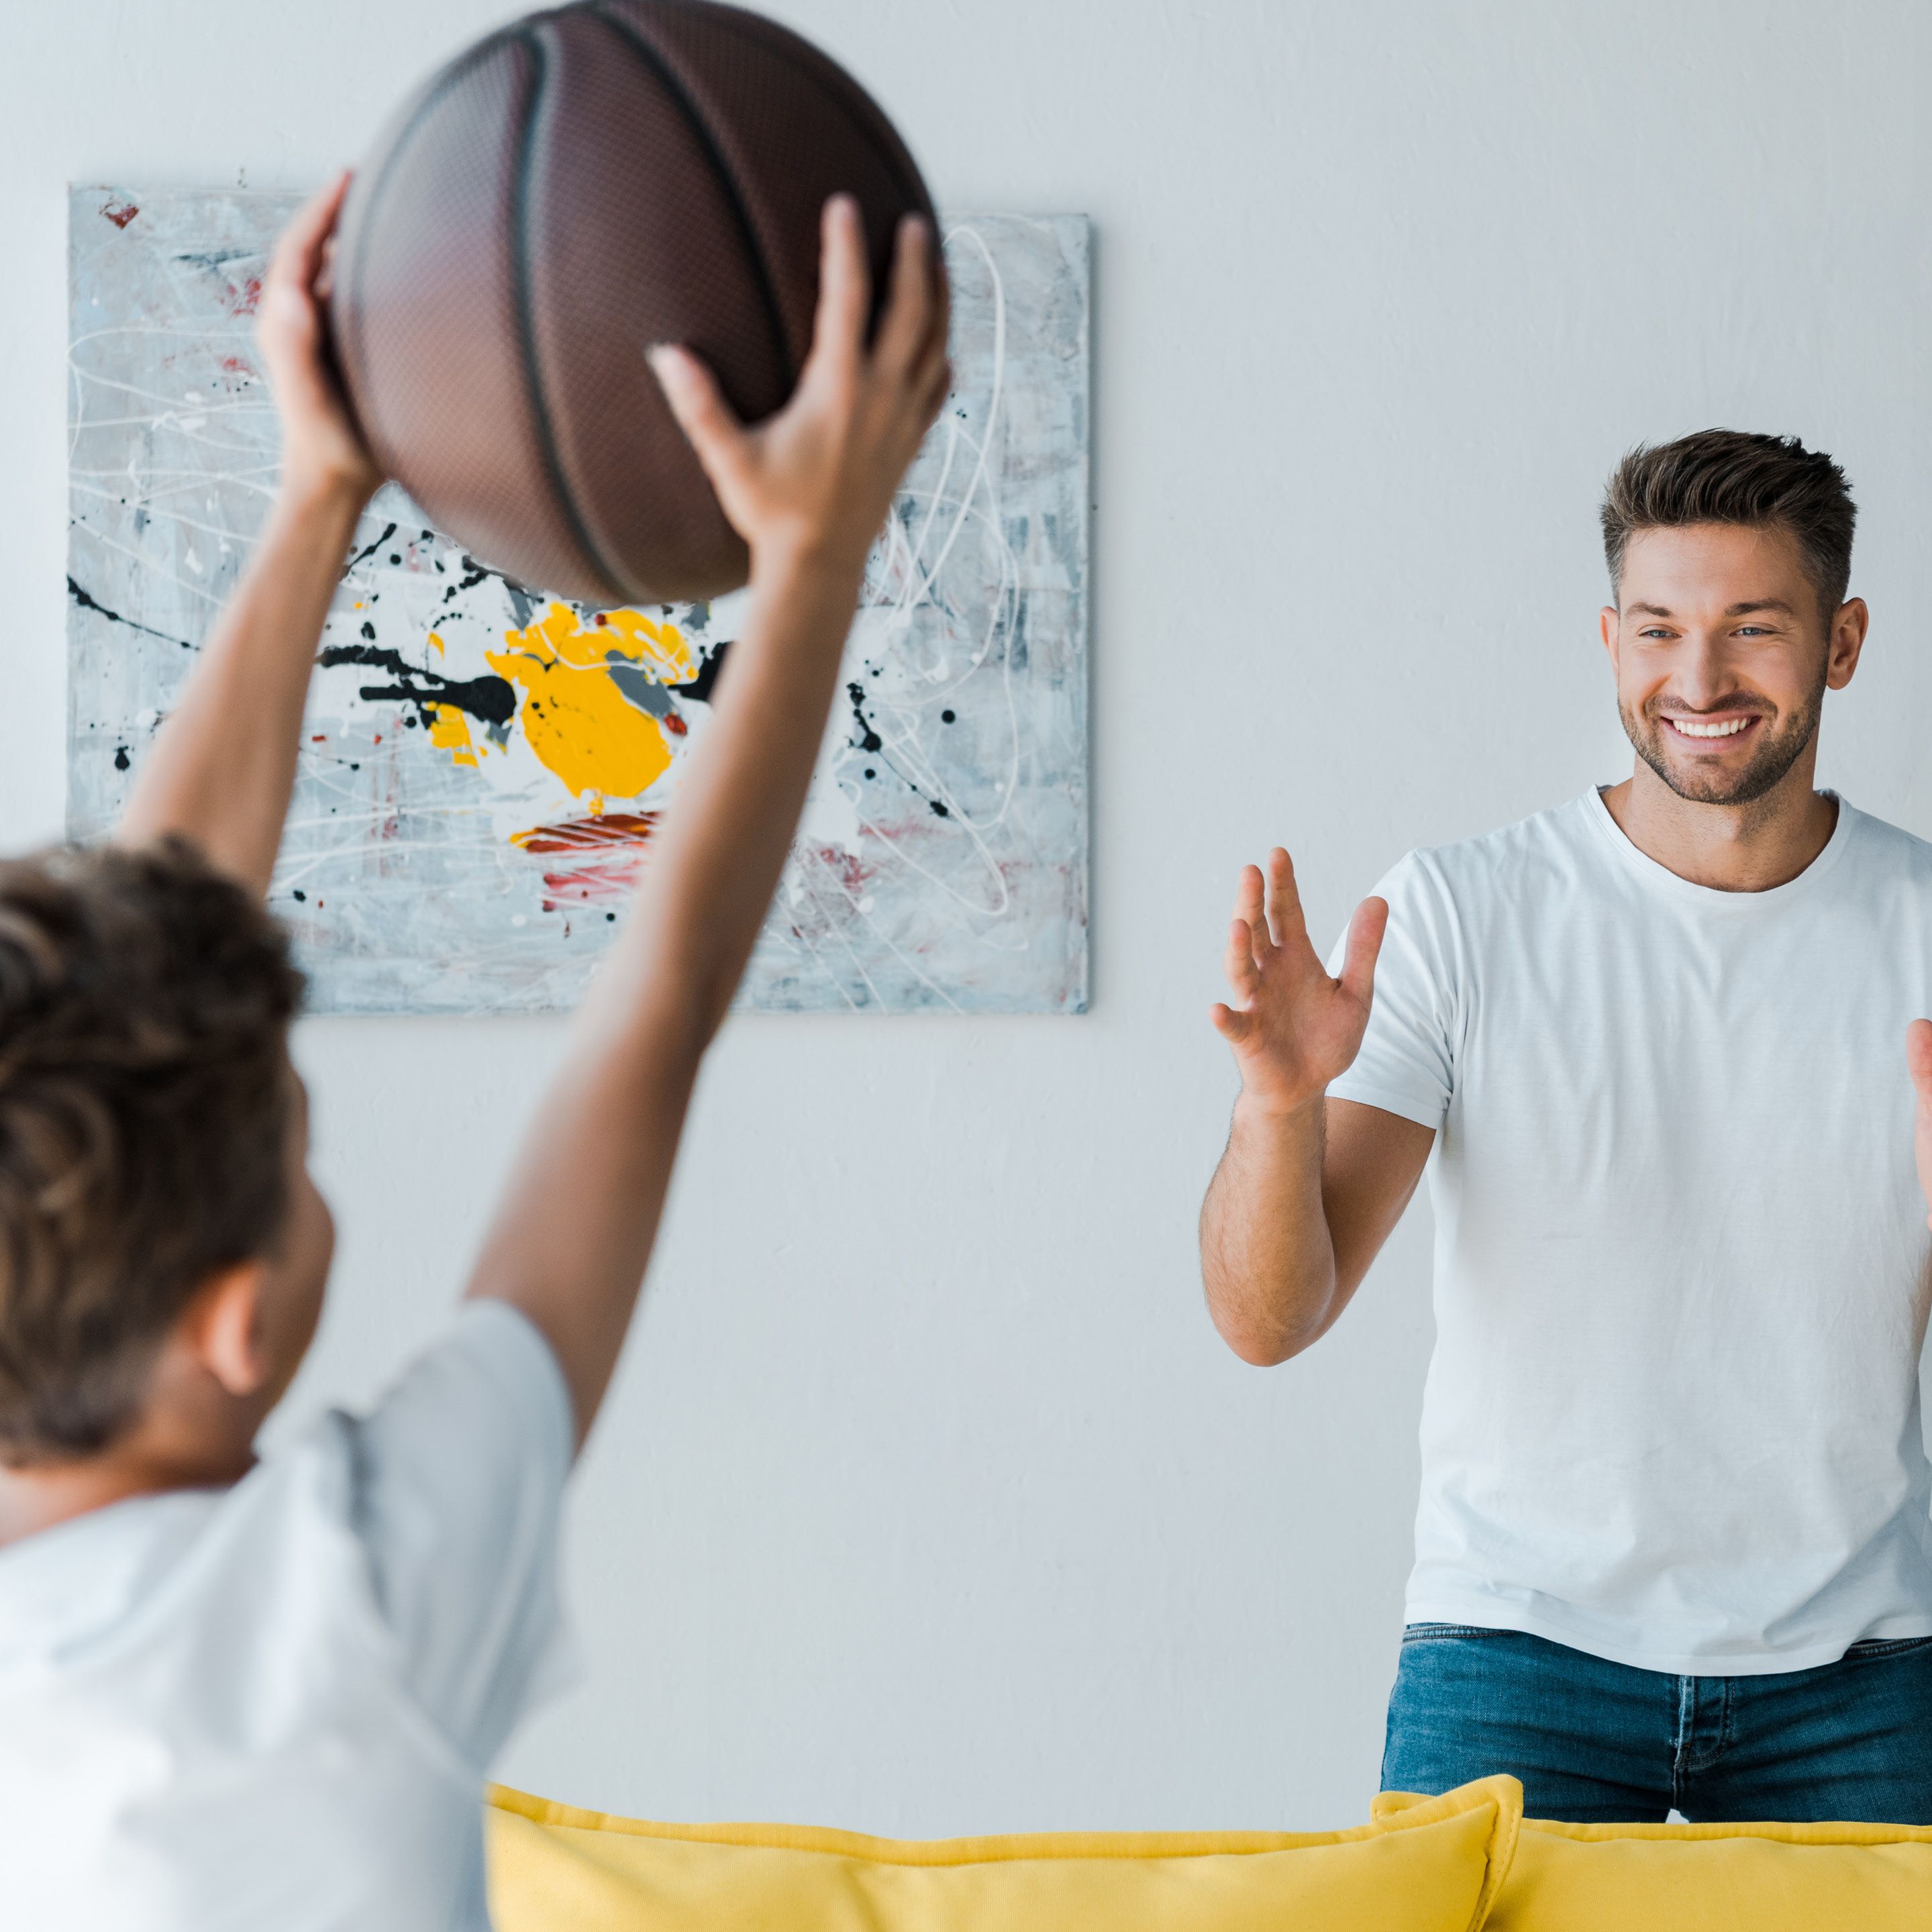 7 Fun and Competitive Basketball Games for All Ages